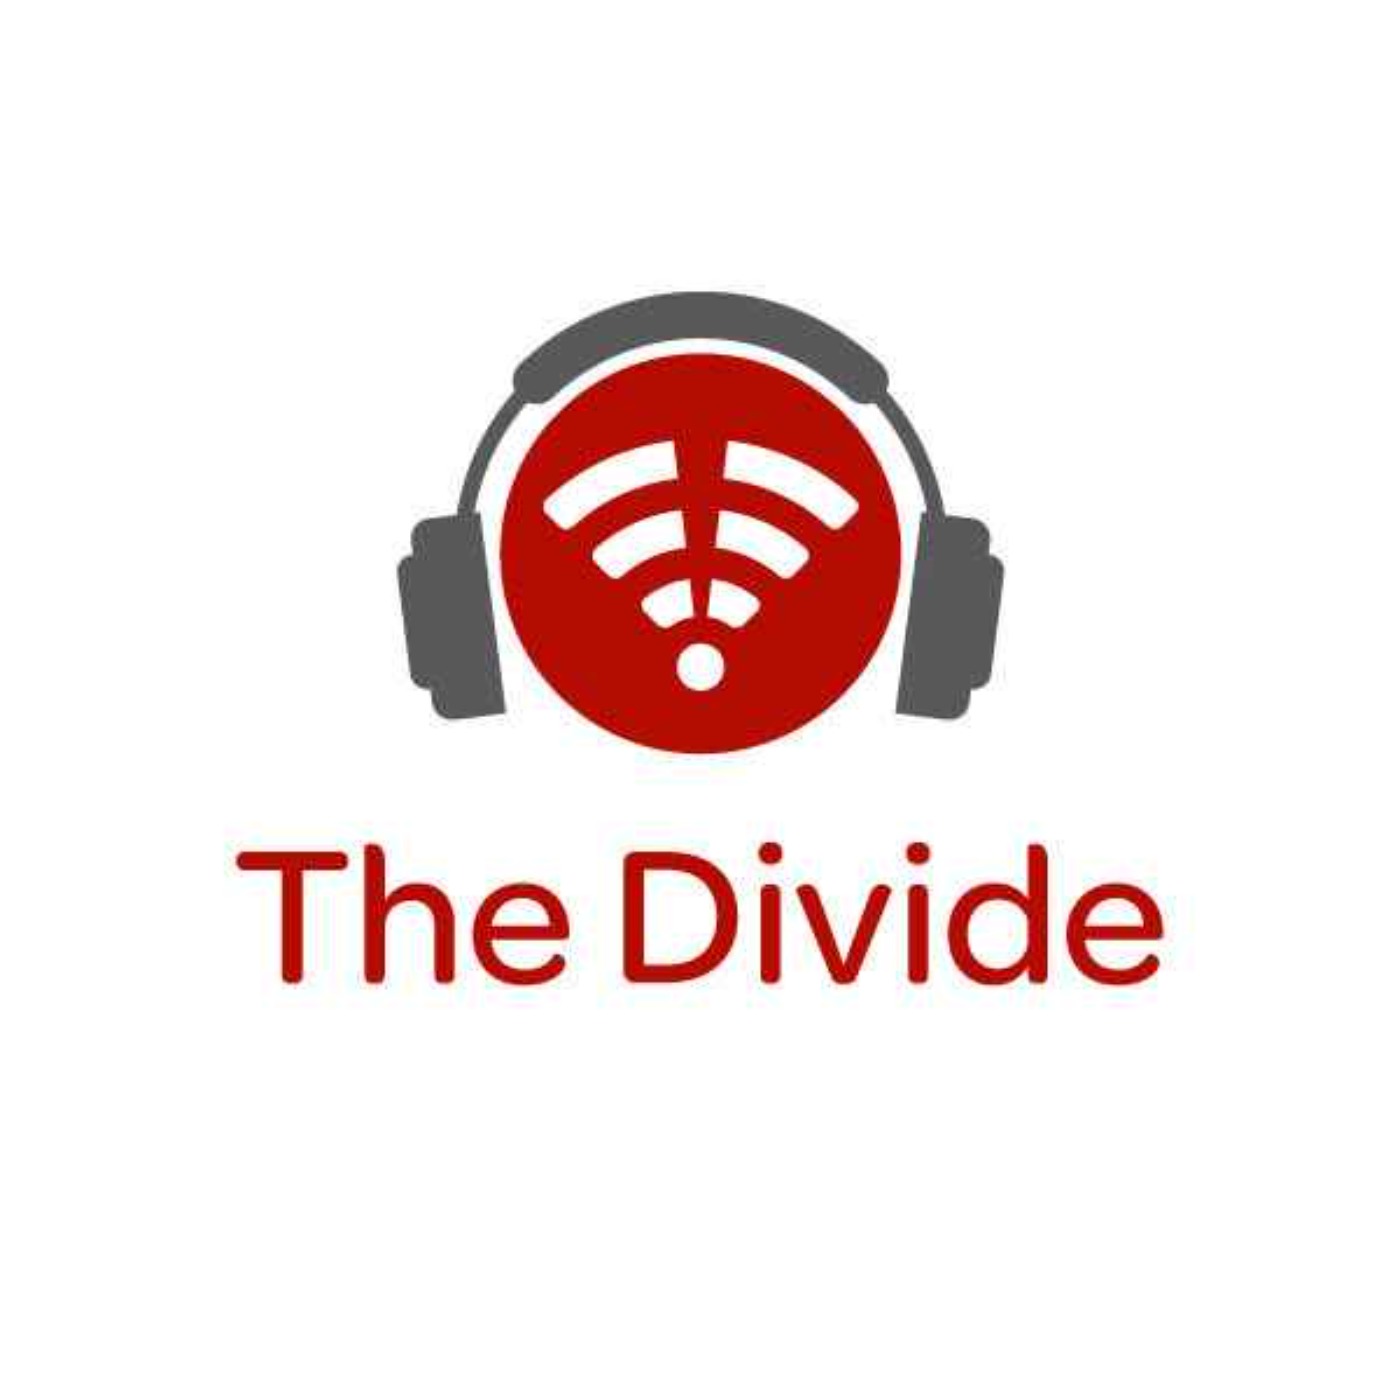 The Divide: Joey Wender on US Treasury’s $10B down payment on closing the digital divide